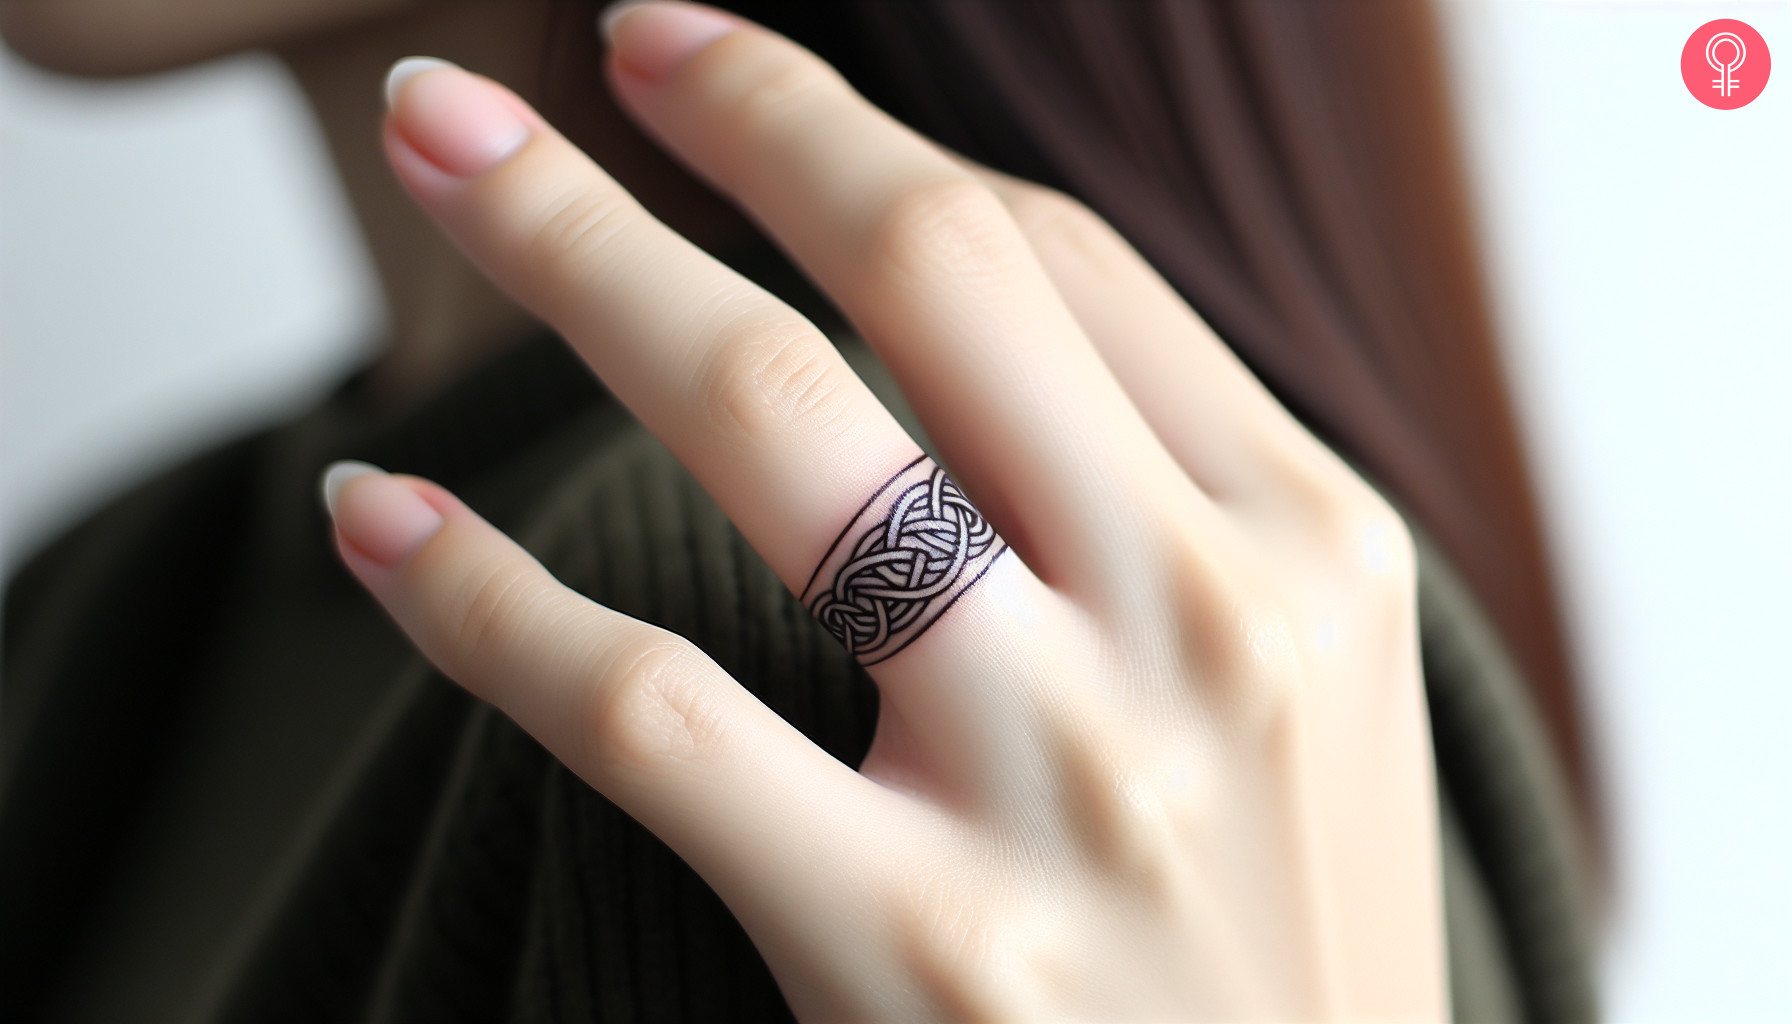 Woman with marriage Celtic knot ring tattoo